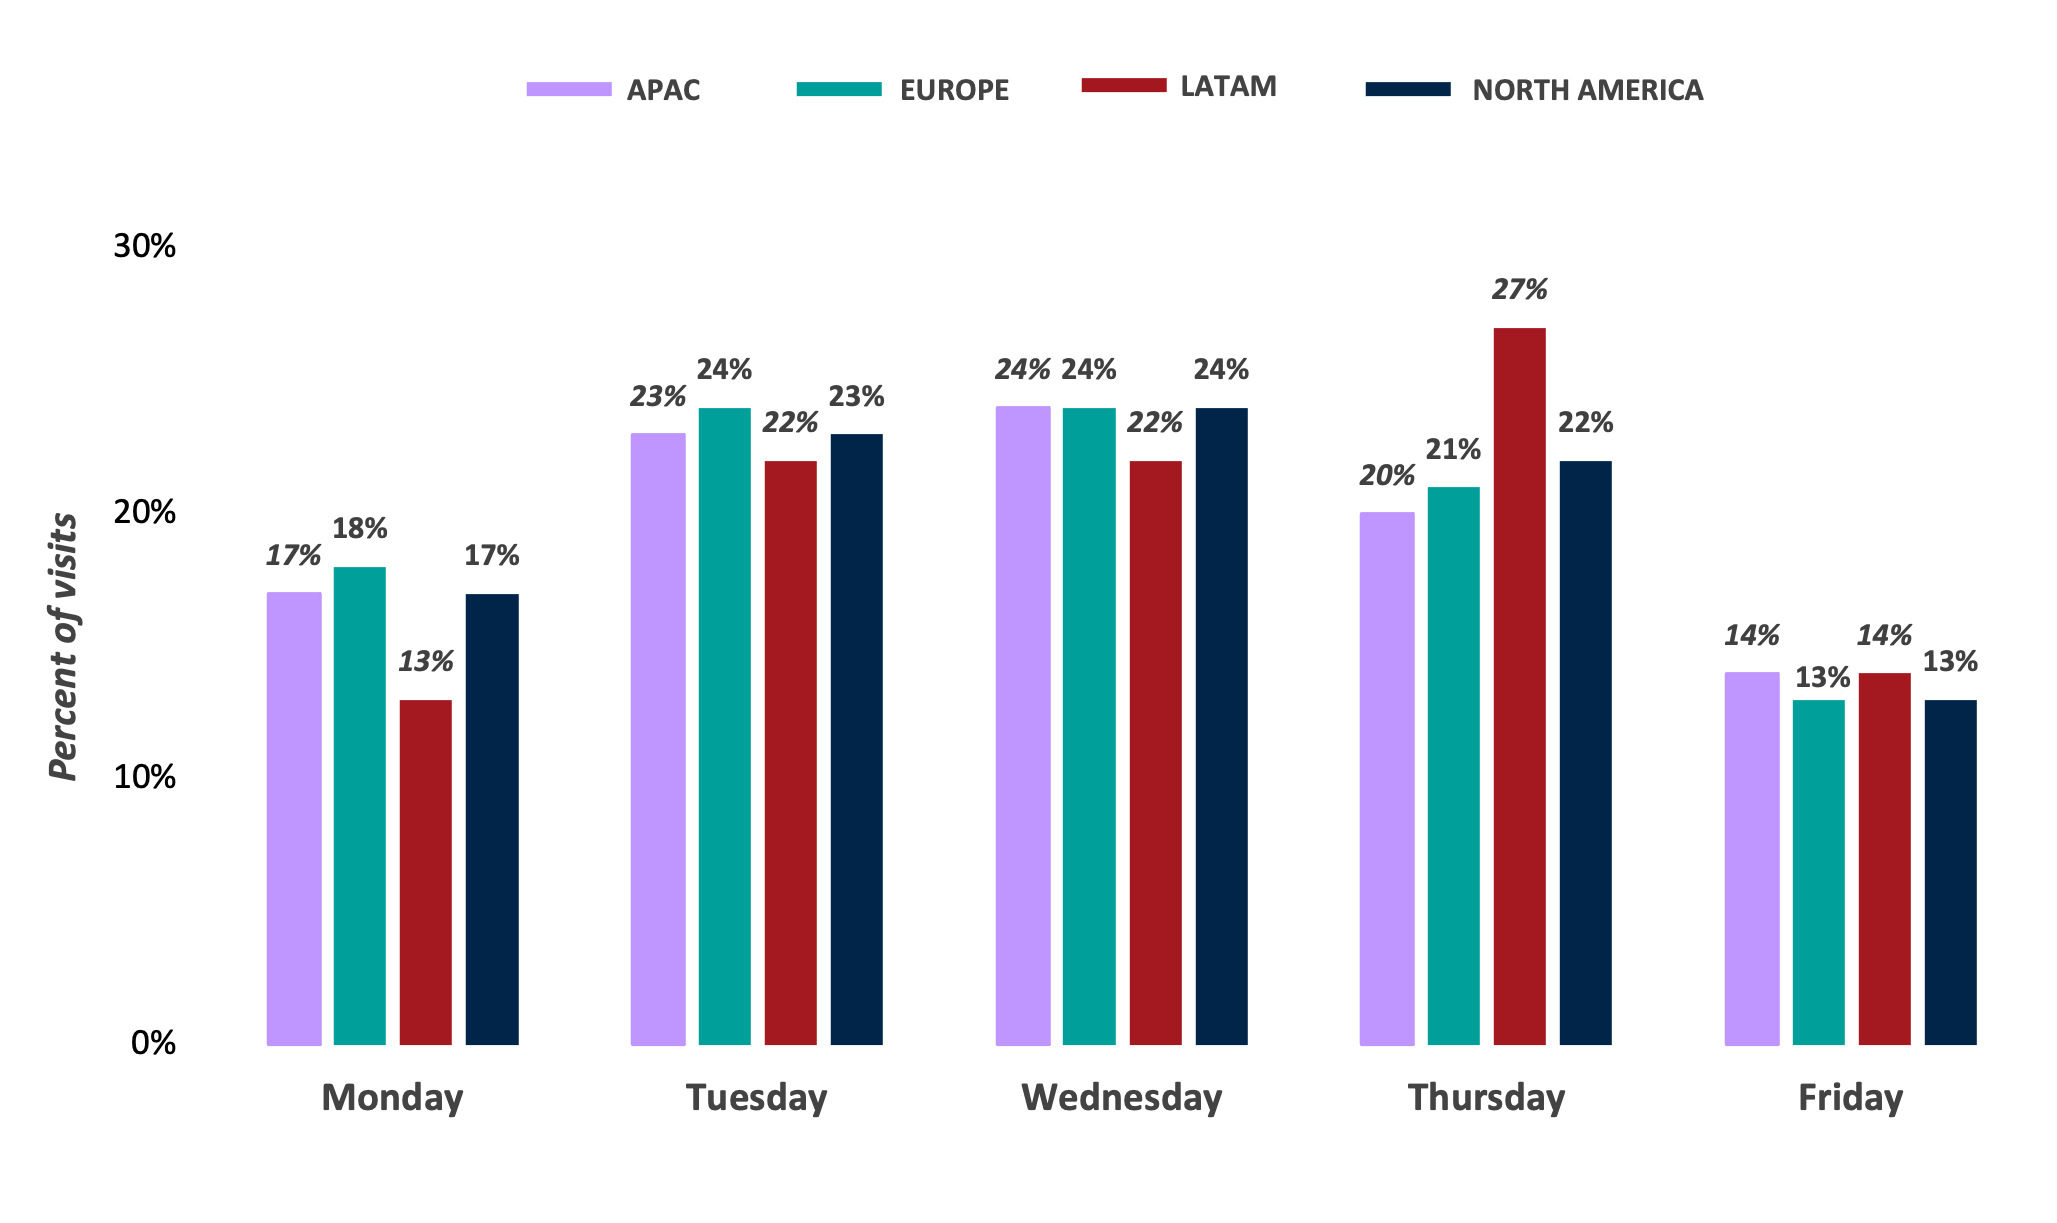 Global occupancy benchmarks show Friday continues to be the least busy day for office visits across all regions (APAC - 14%; LATAM - 14%; Europe - 13%; North America - 13%)